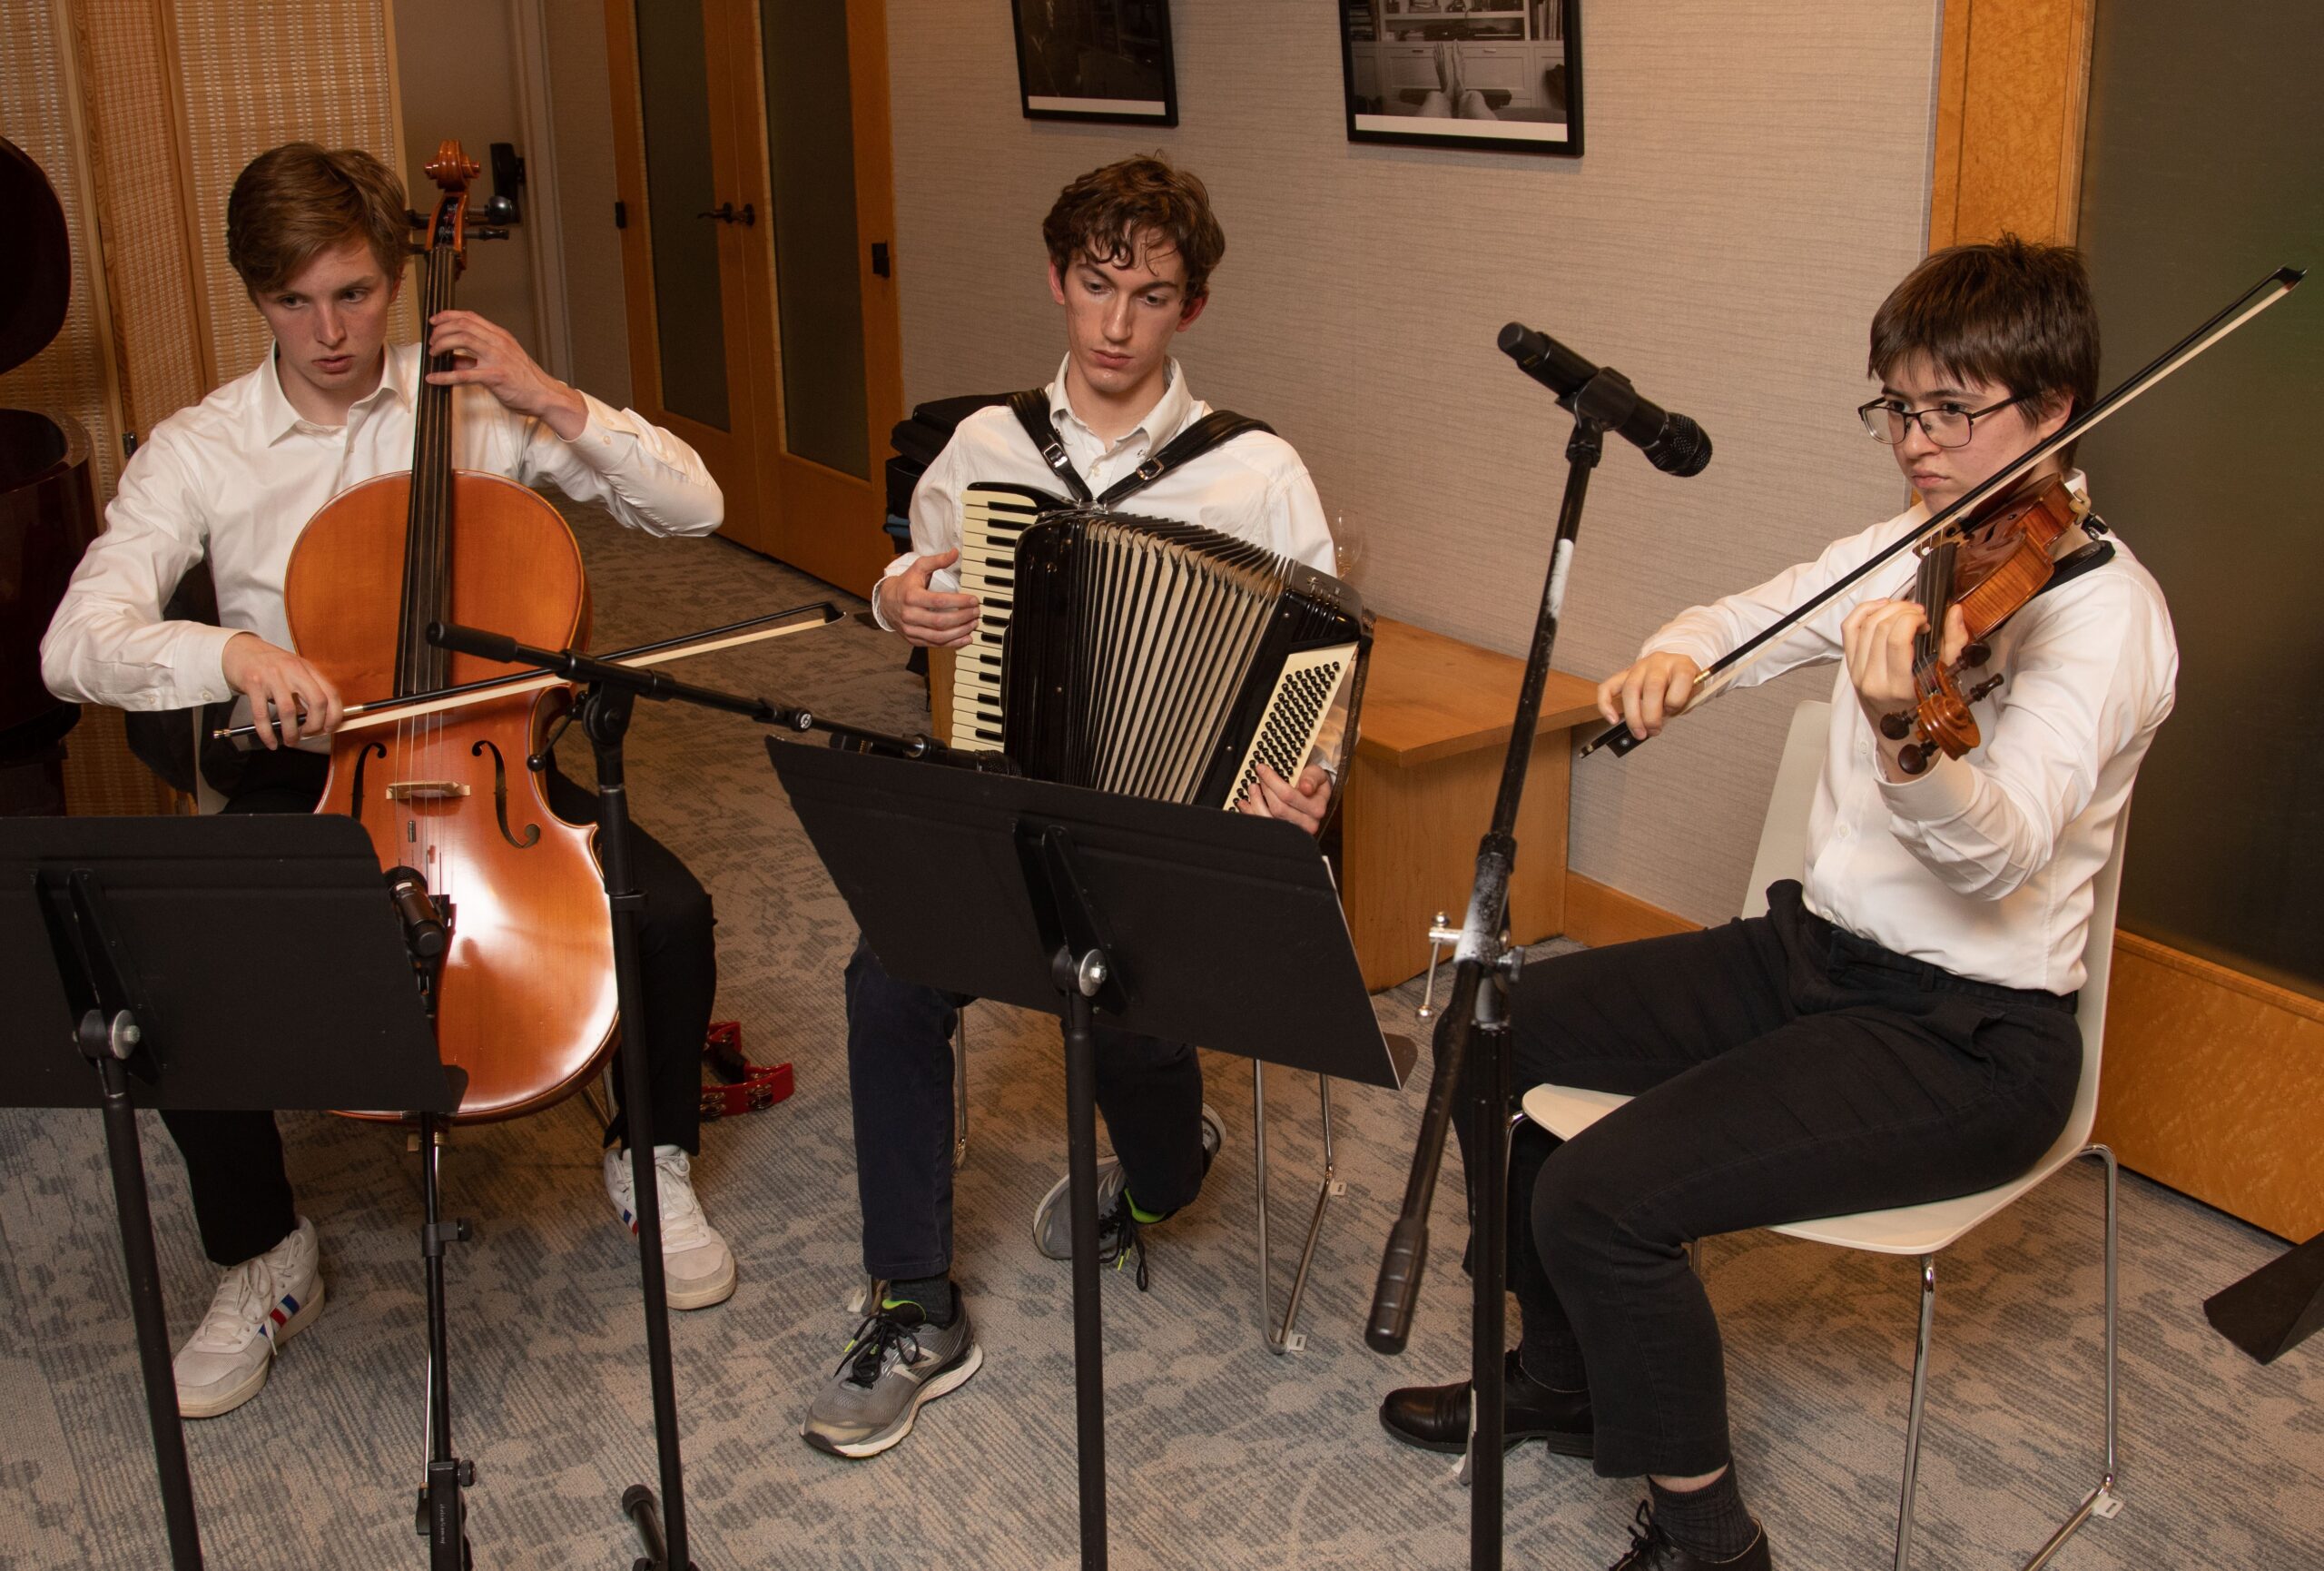 Three people sitting together playing klezmer music, one with a cello, one with an accordion and one with a violin. All are dressed formally in white shirts and black pants.